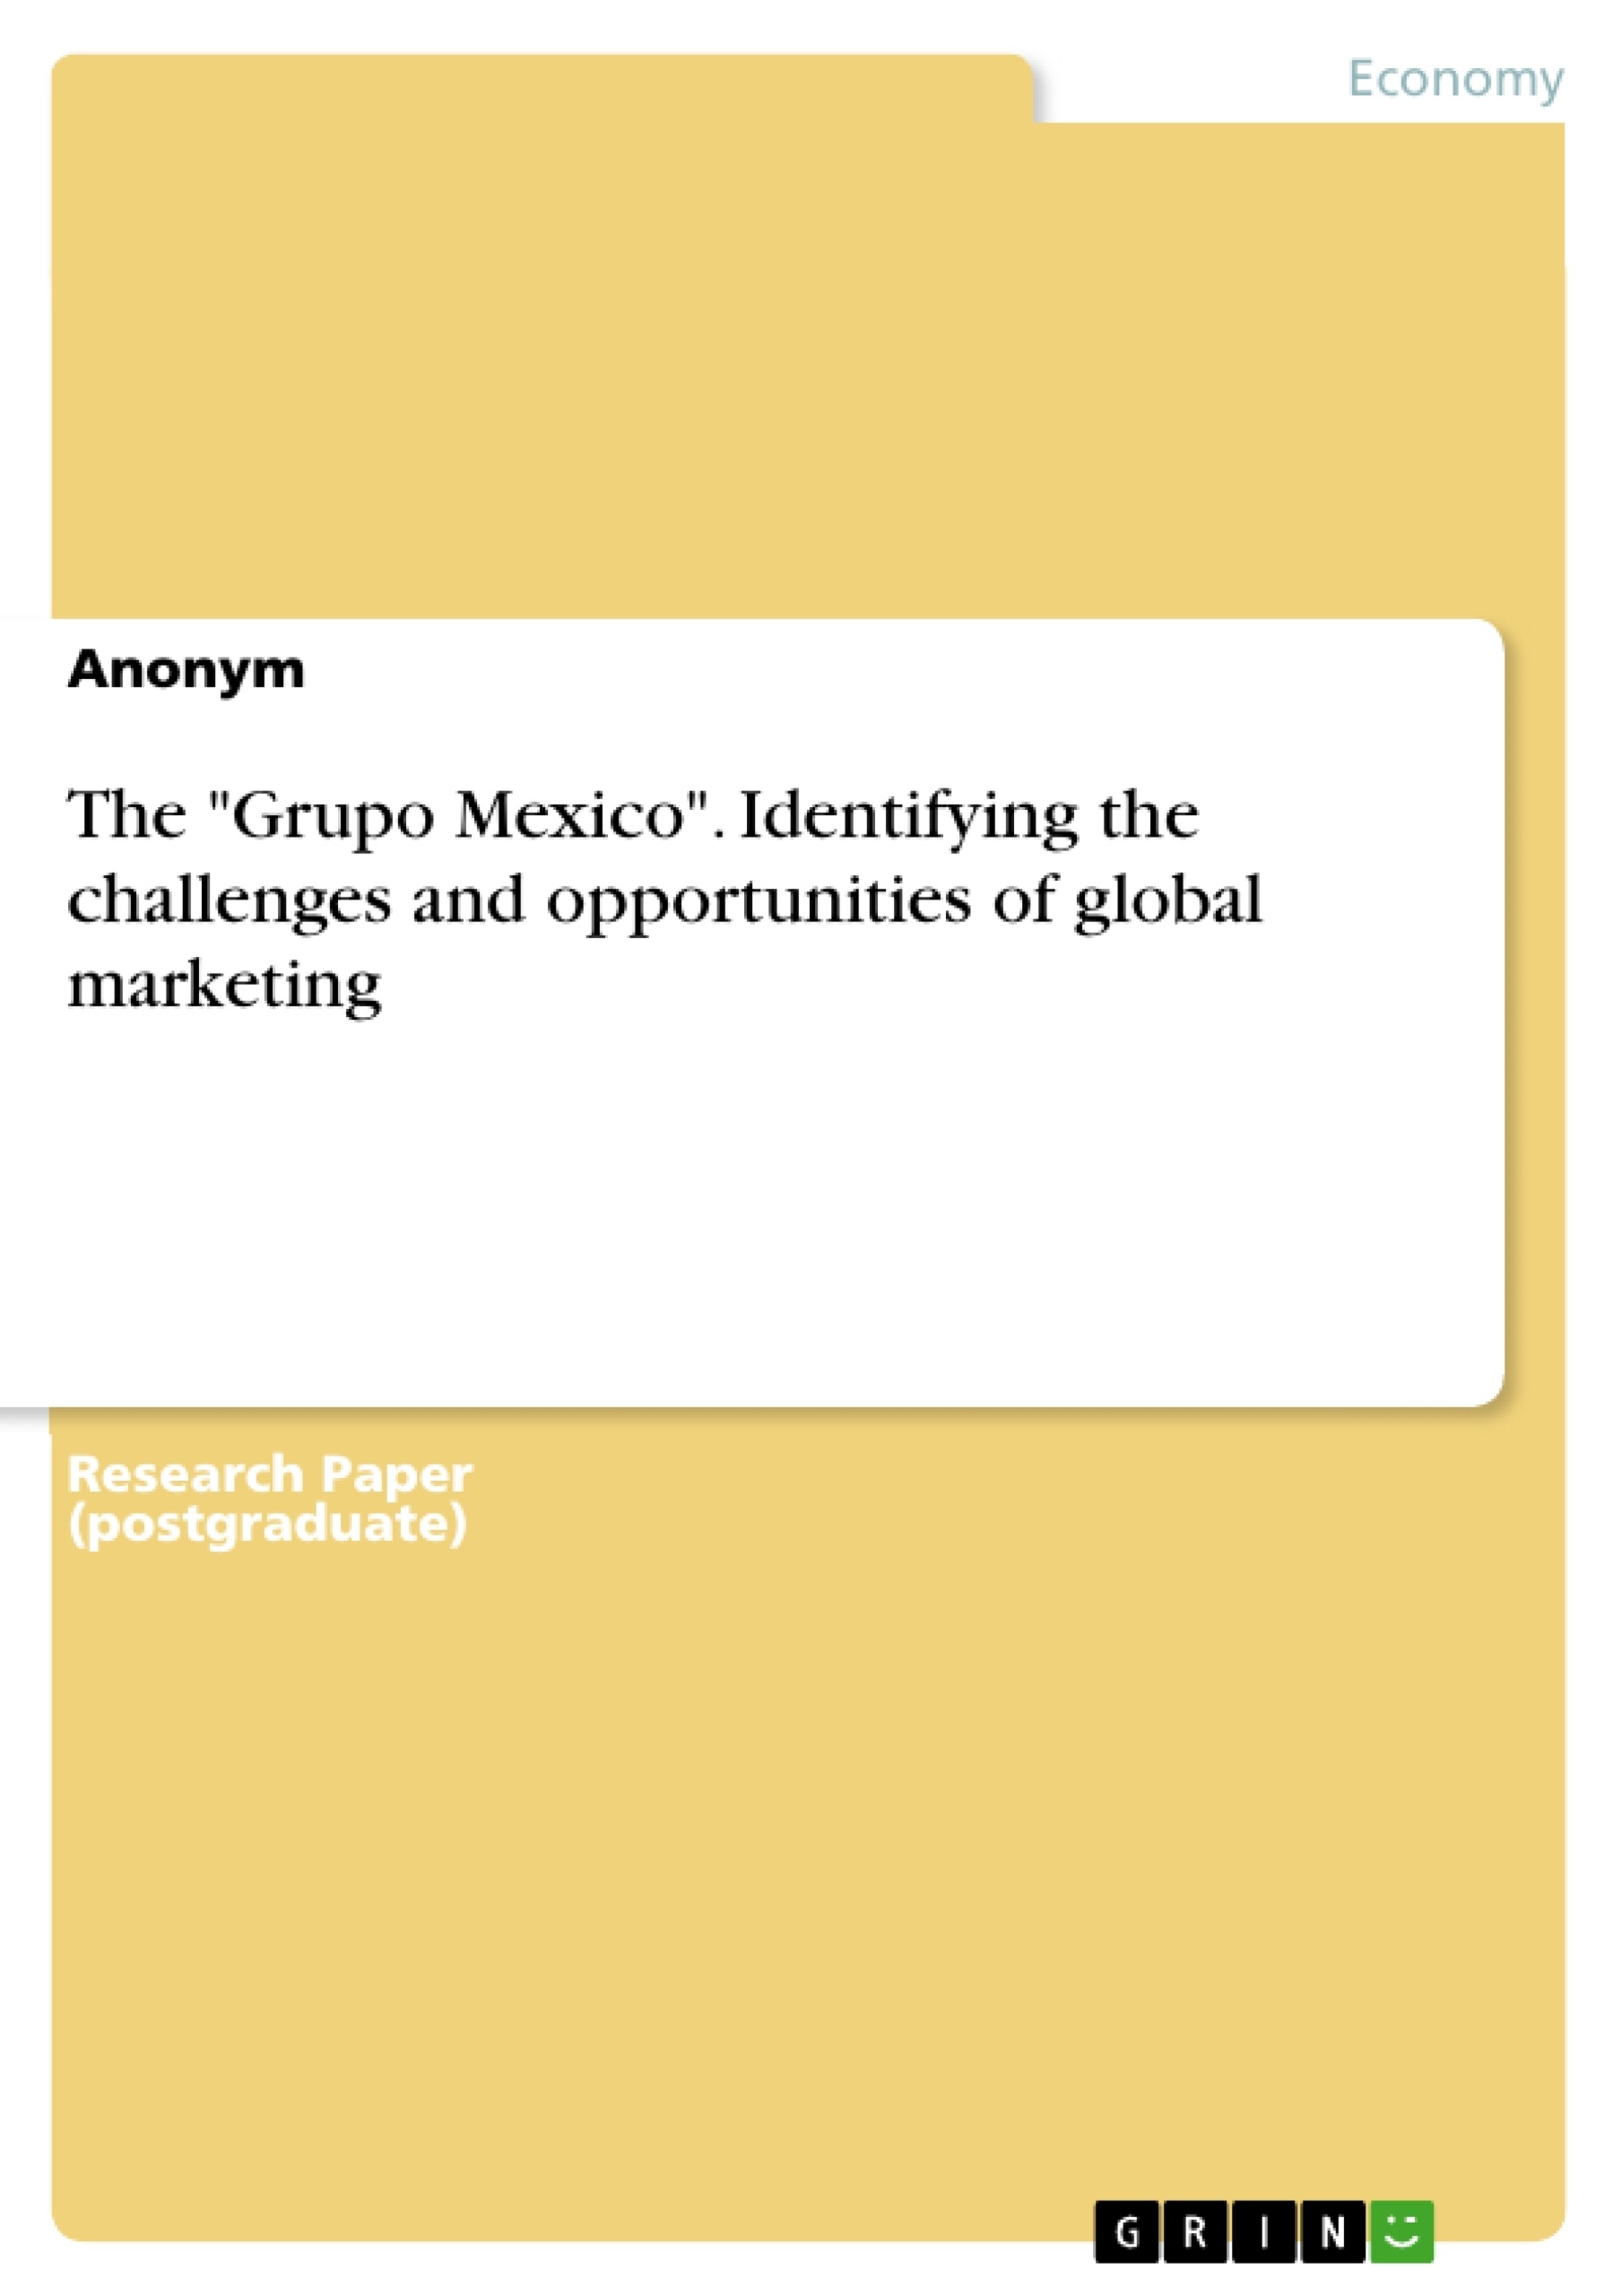 Titel: The "Grupo Mexico". Identifying the challenges and opportunities of global marketing